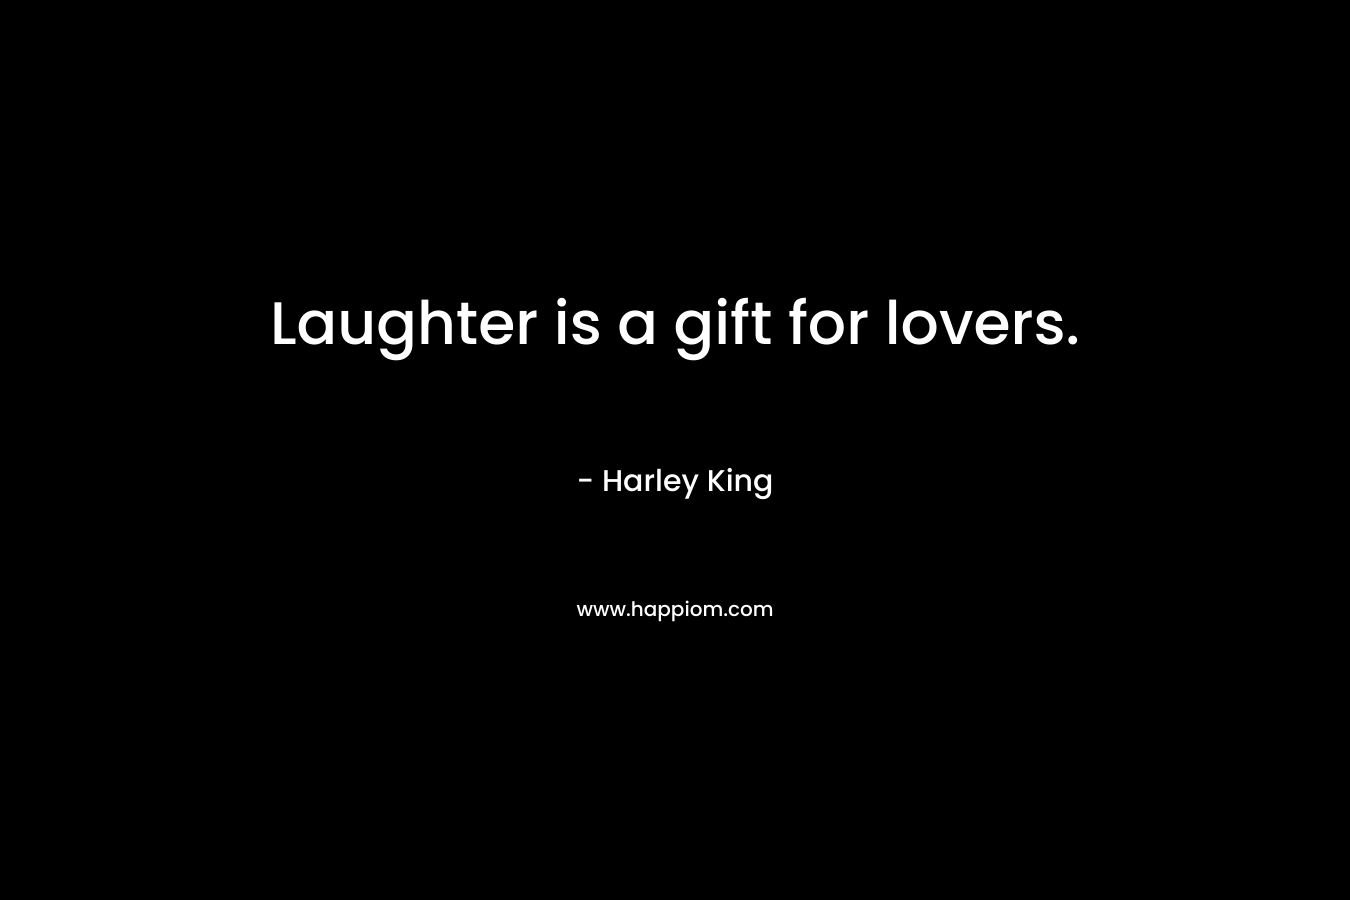 Laughter is a gift for lovers. – Harley King